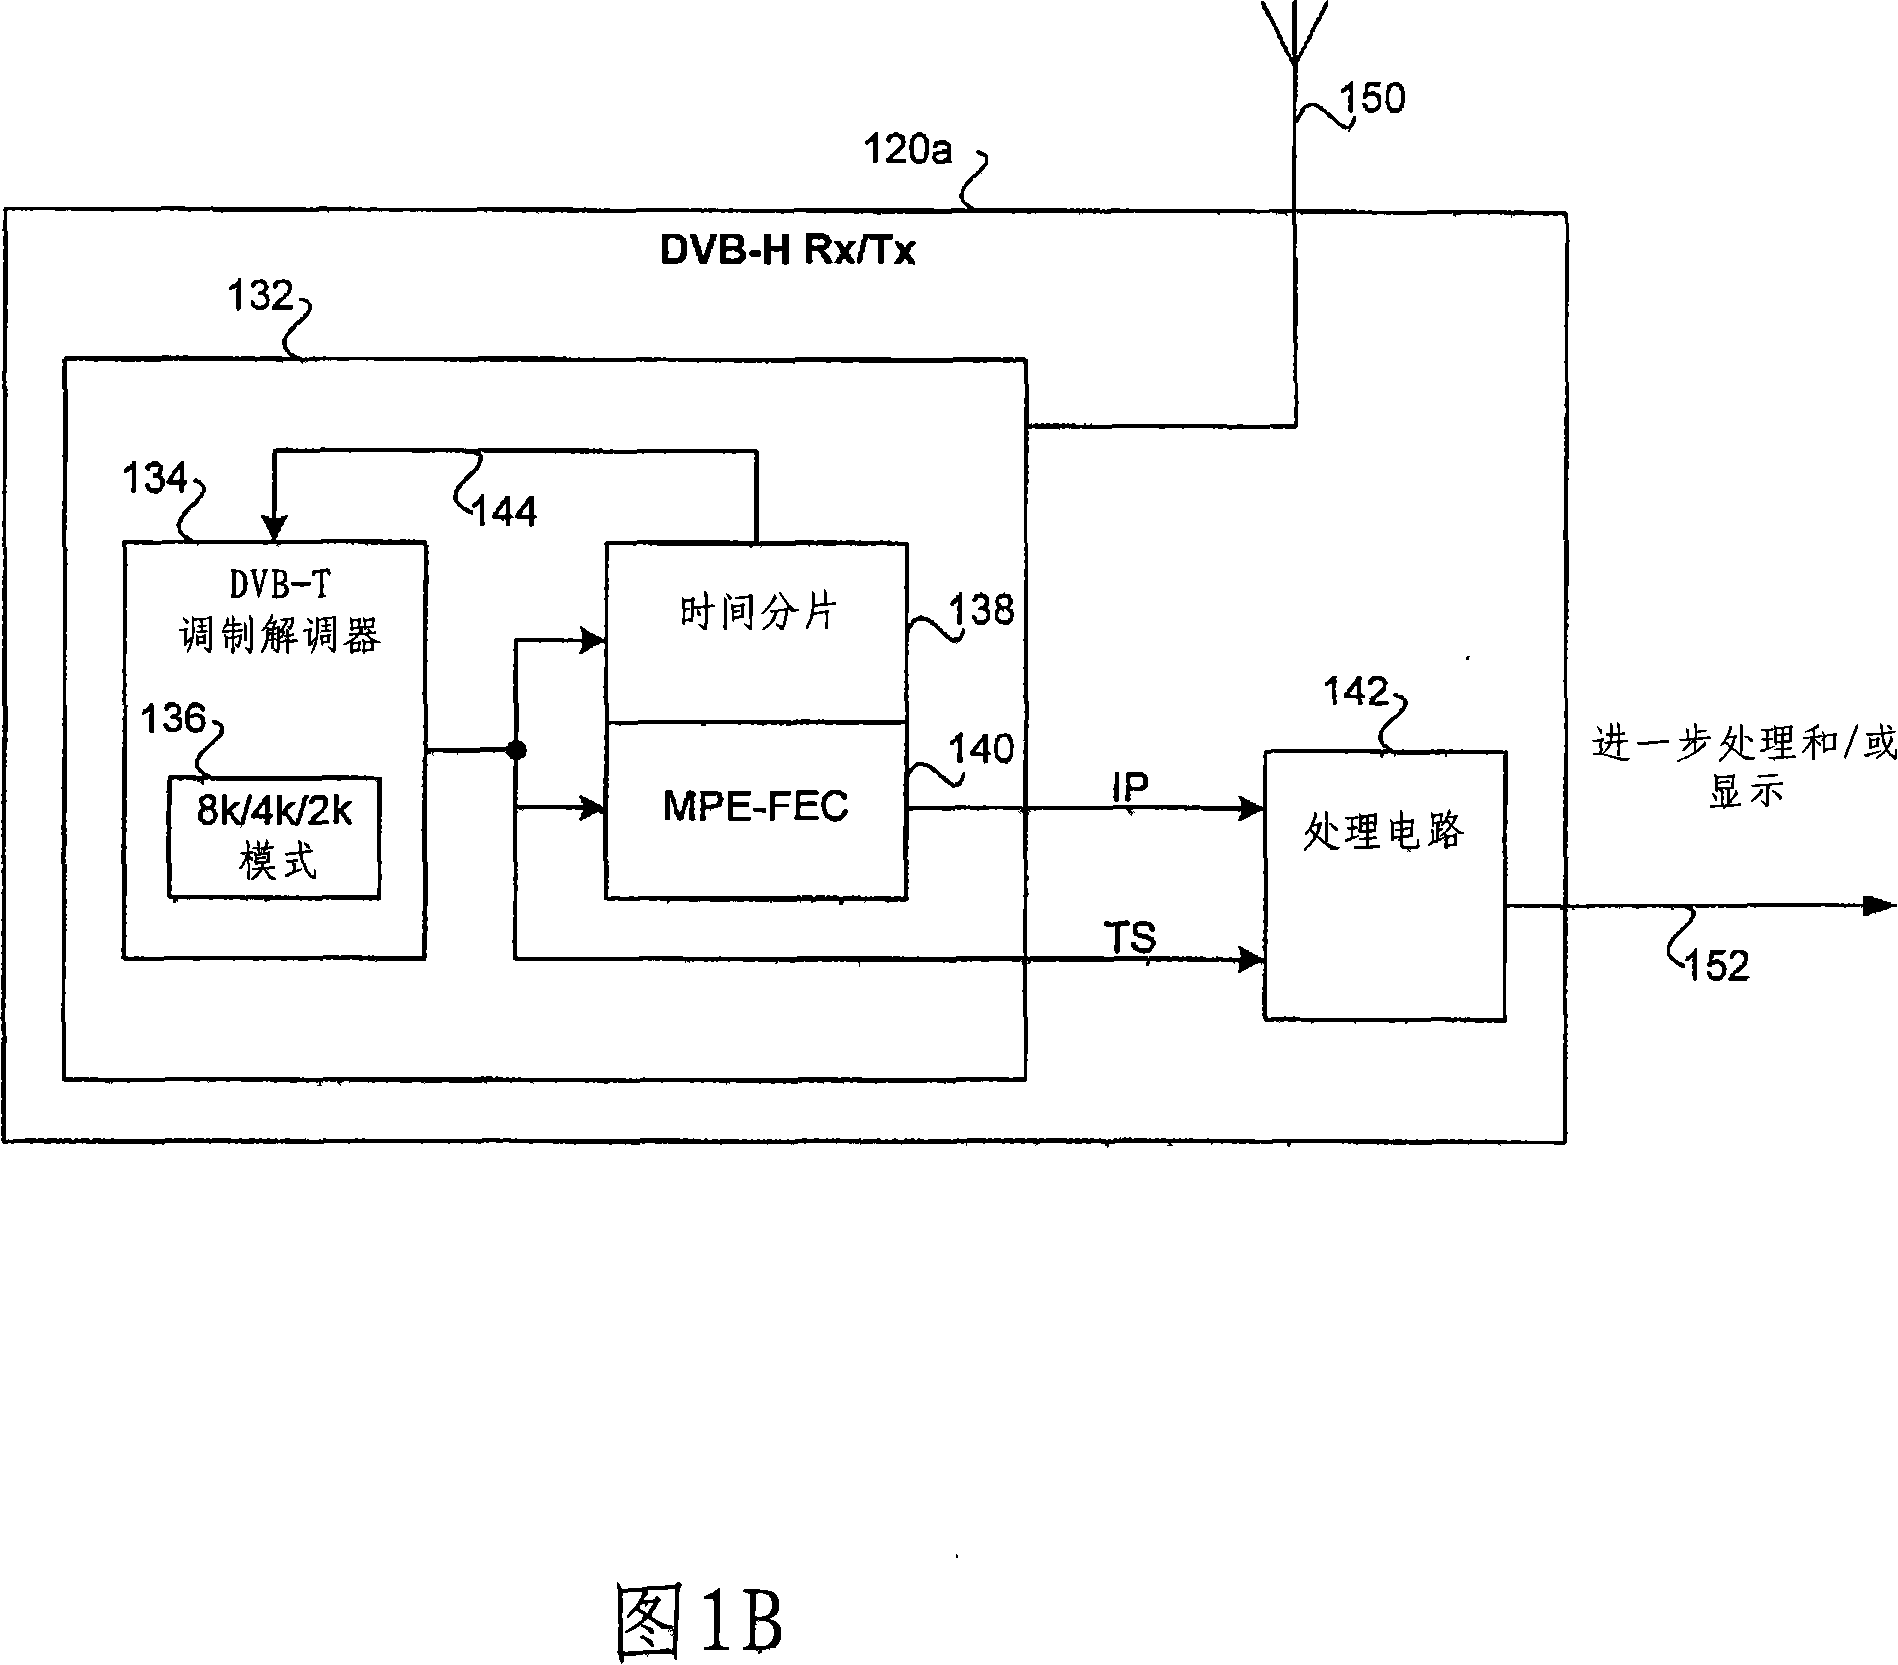 Method and system for integrated cable modem and dvb-h receiver and/or transmitter